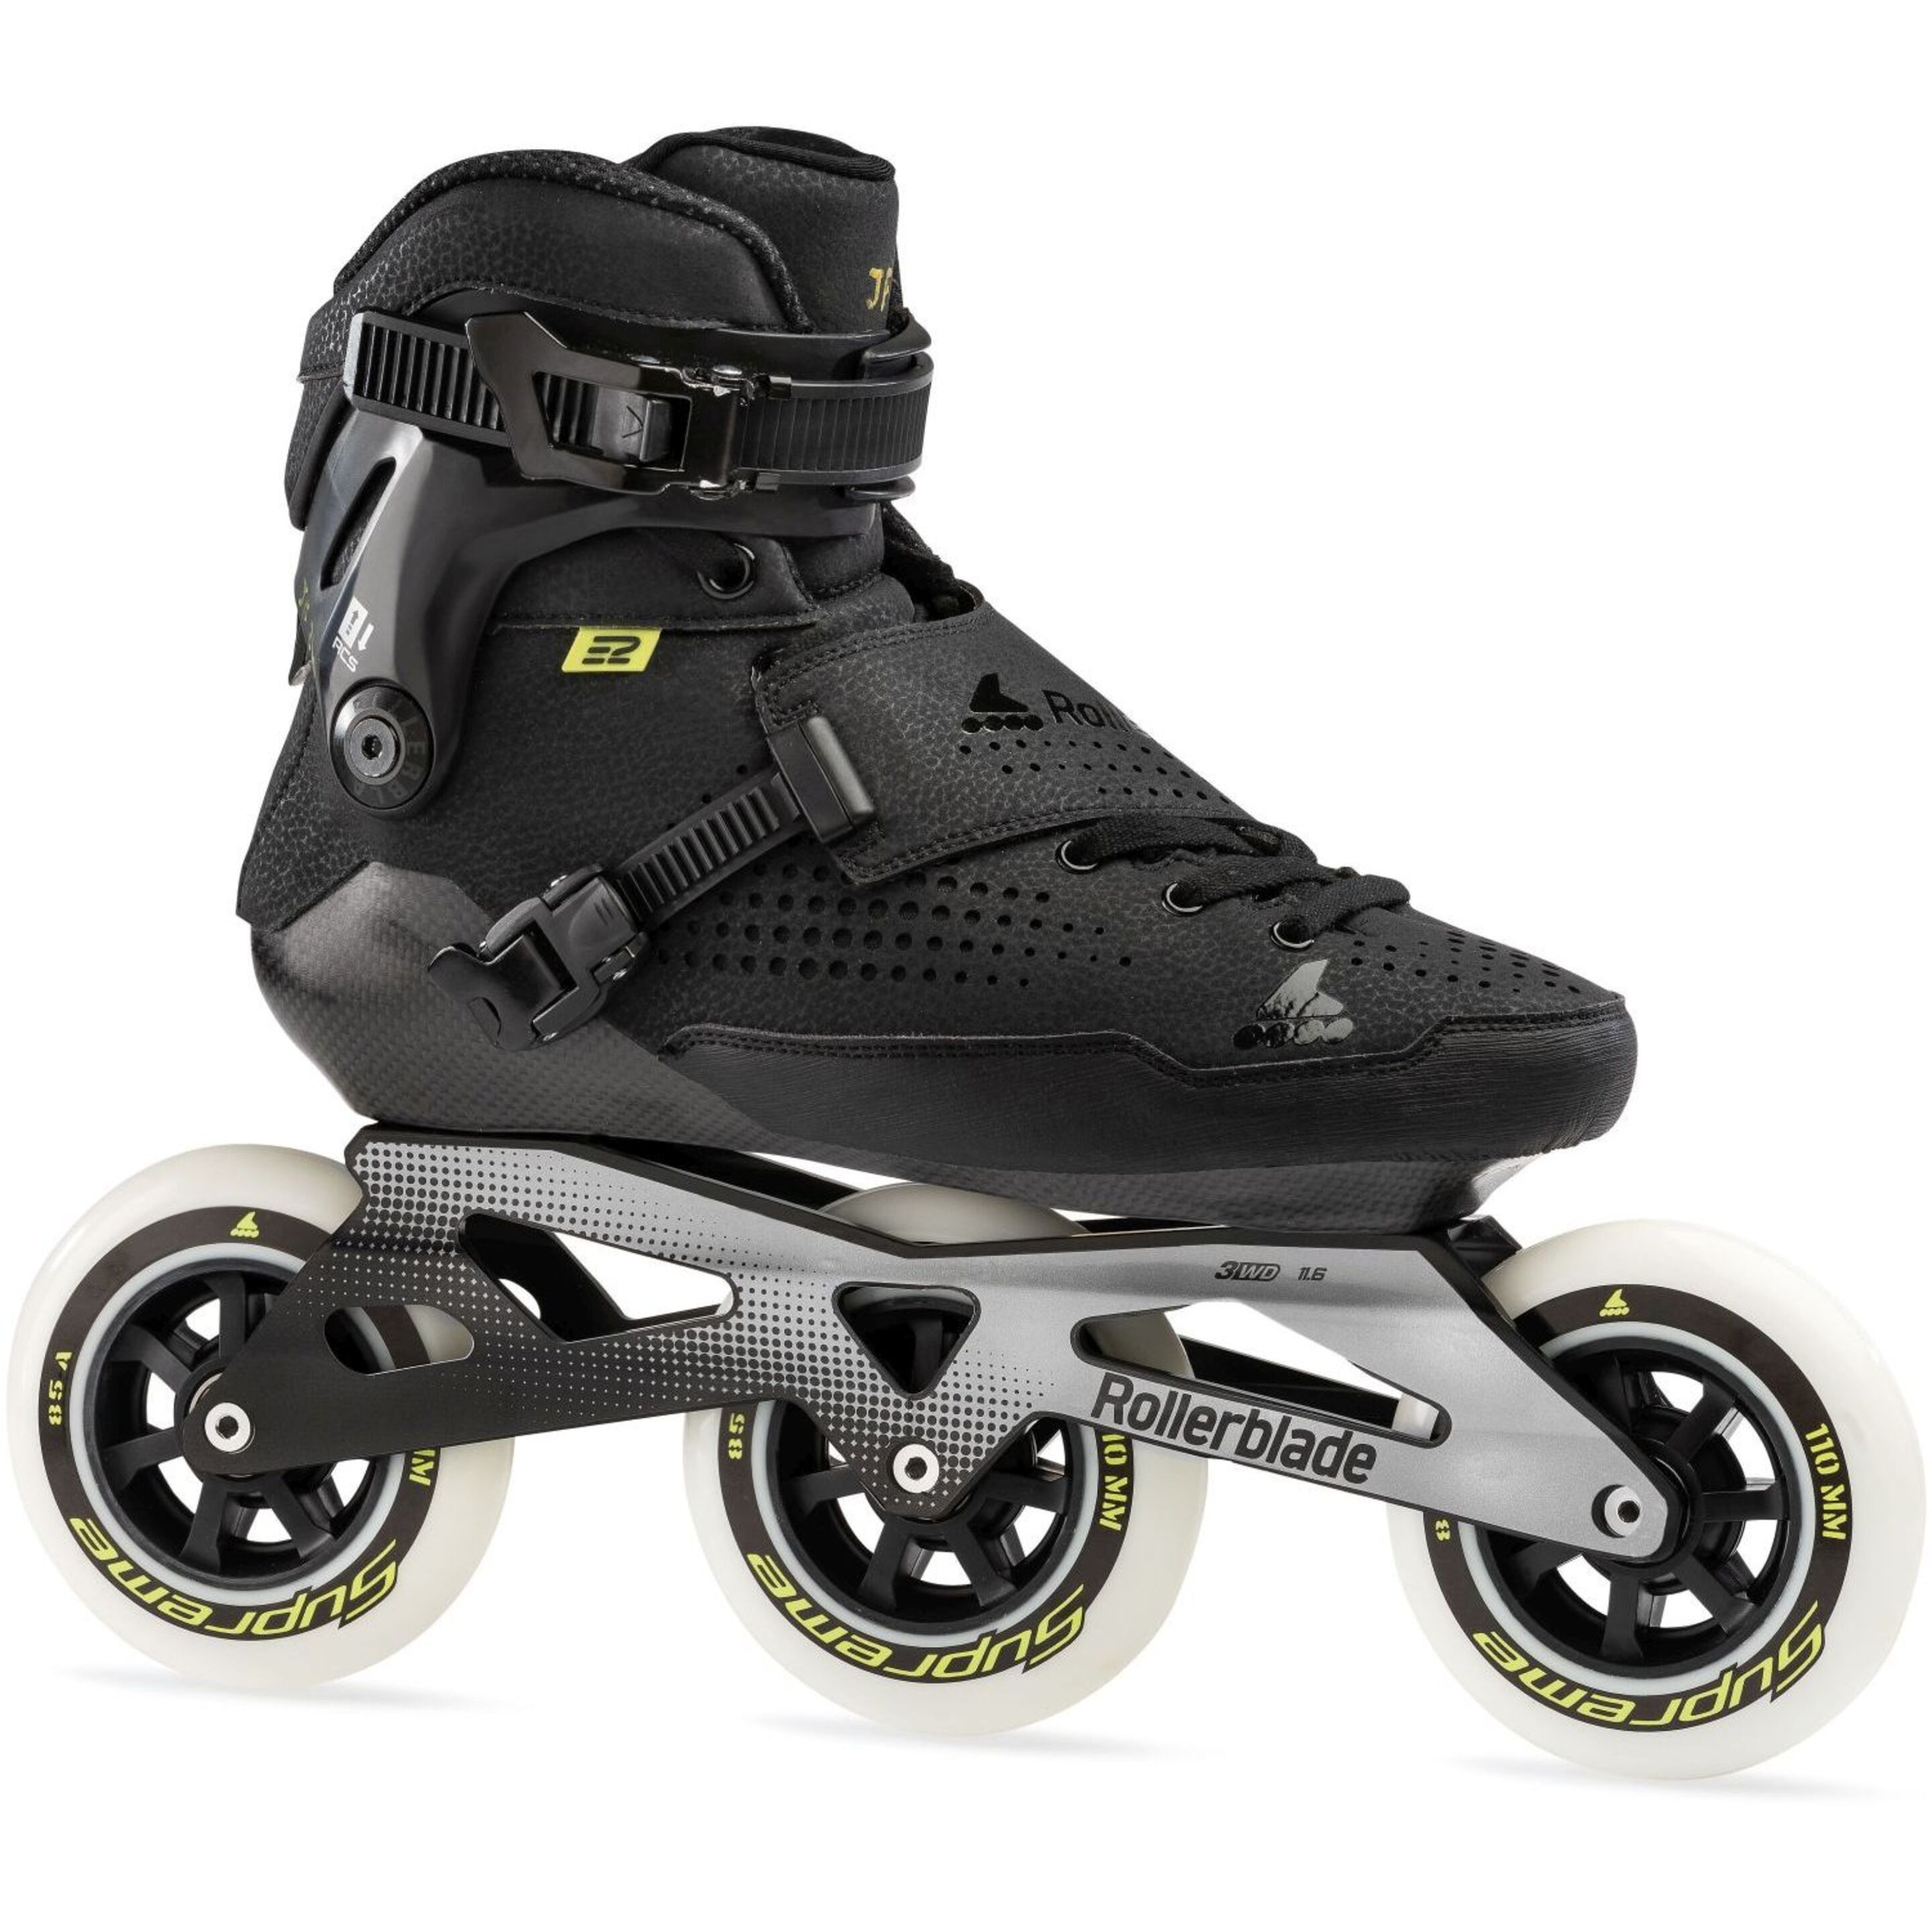 Patines Rollerblade E2 110